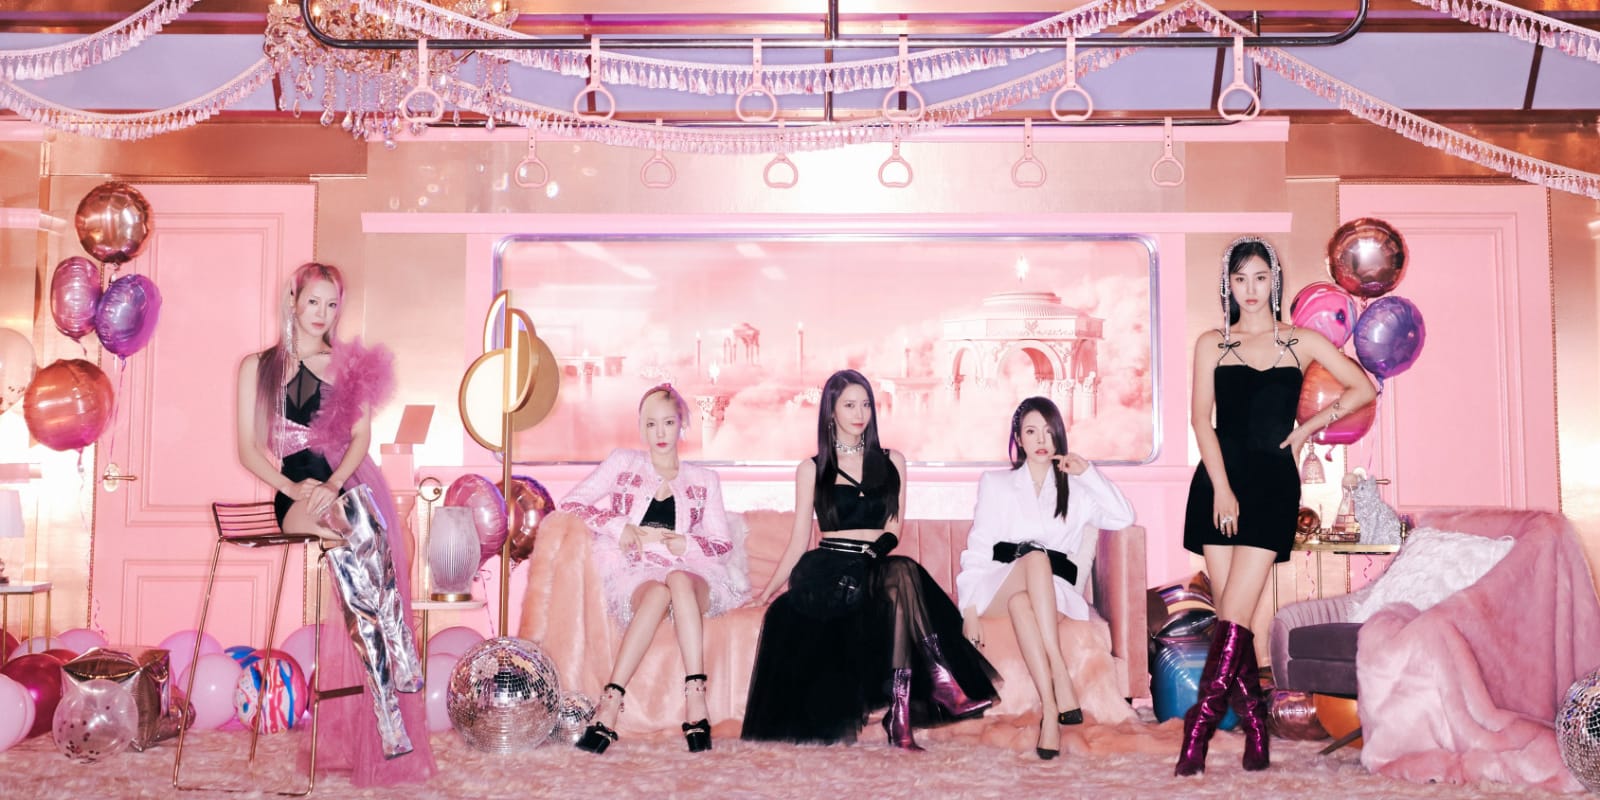 SM Shares Girls Generation OH!GG Teaser Photo for SM Town 2022 SMCU!